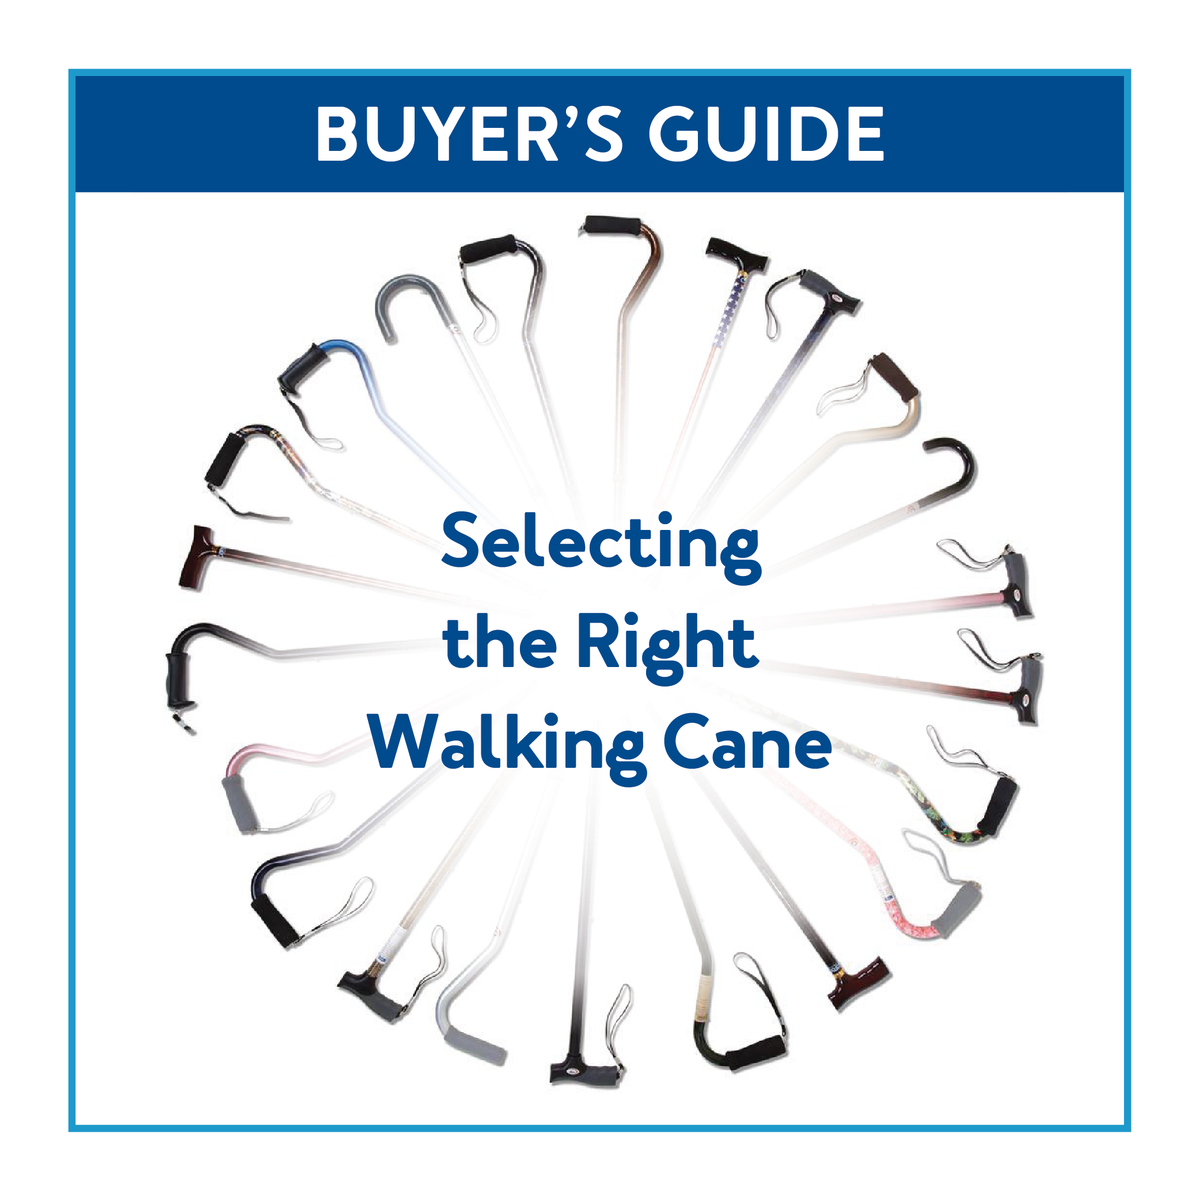 Walking canes encircled, bordered blue. text: Buyer’s Guide: Selecting the Right Walking Cane.